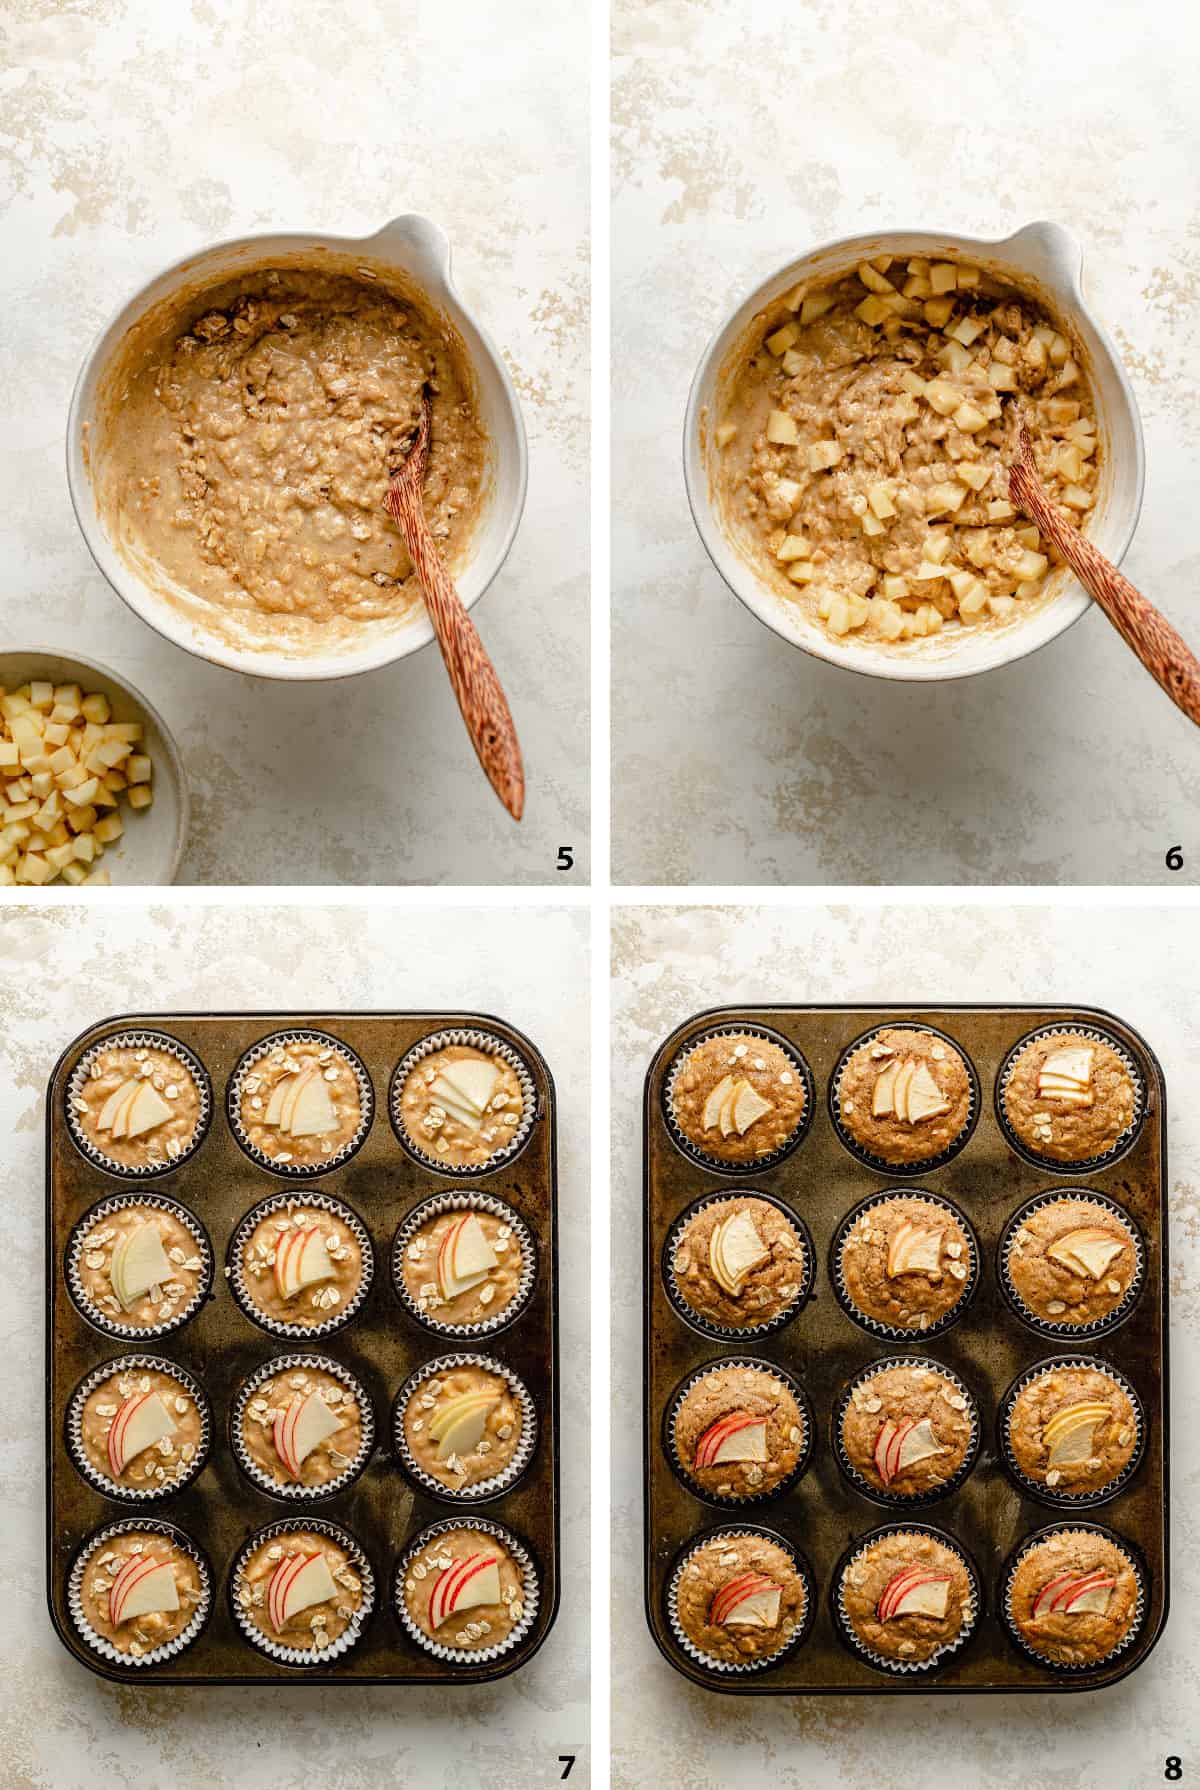 Mixing batter together with apple chunks, putting in muffin cases and baked in a baking tin.